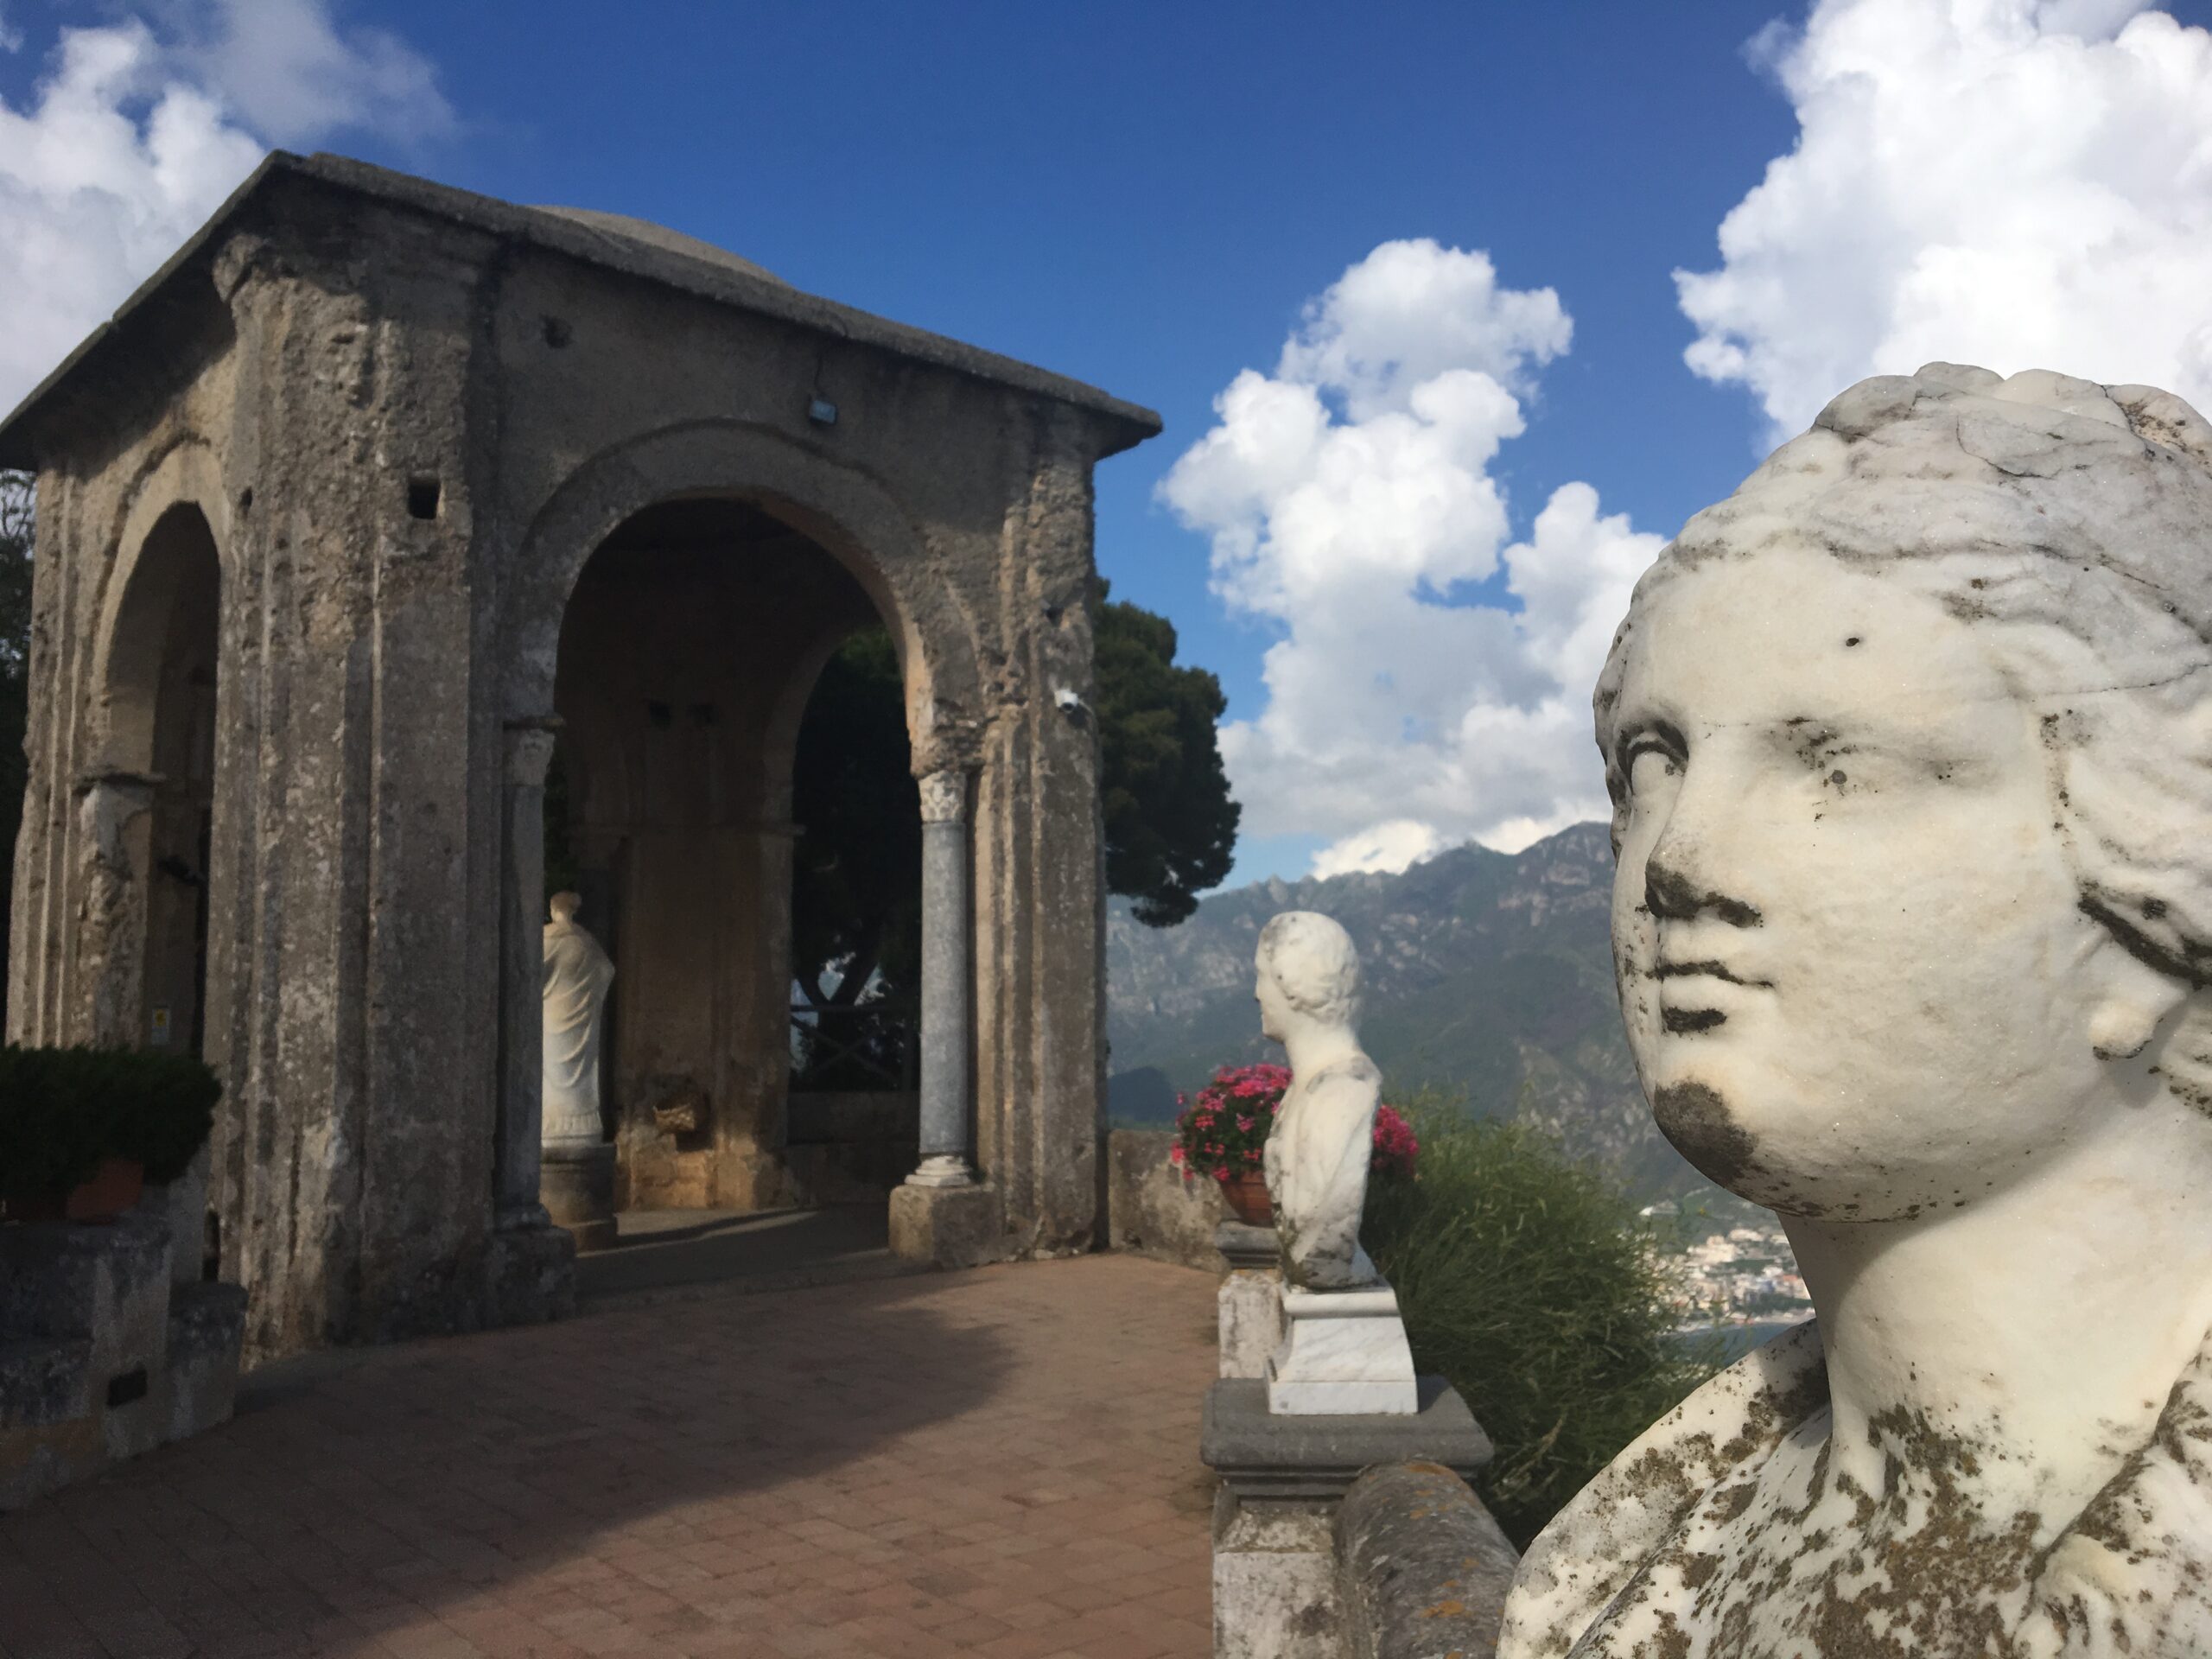 Southern Italy cultural one week itinerary: Naples, Pompeii, Salerno and Amalfi Coast.